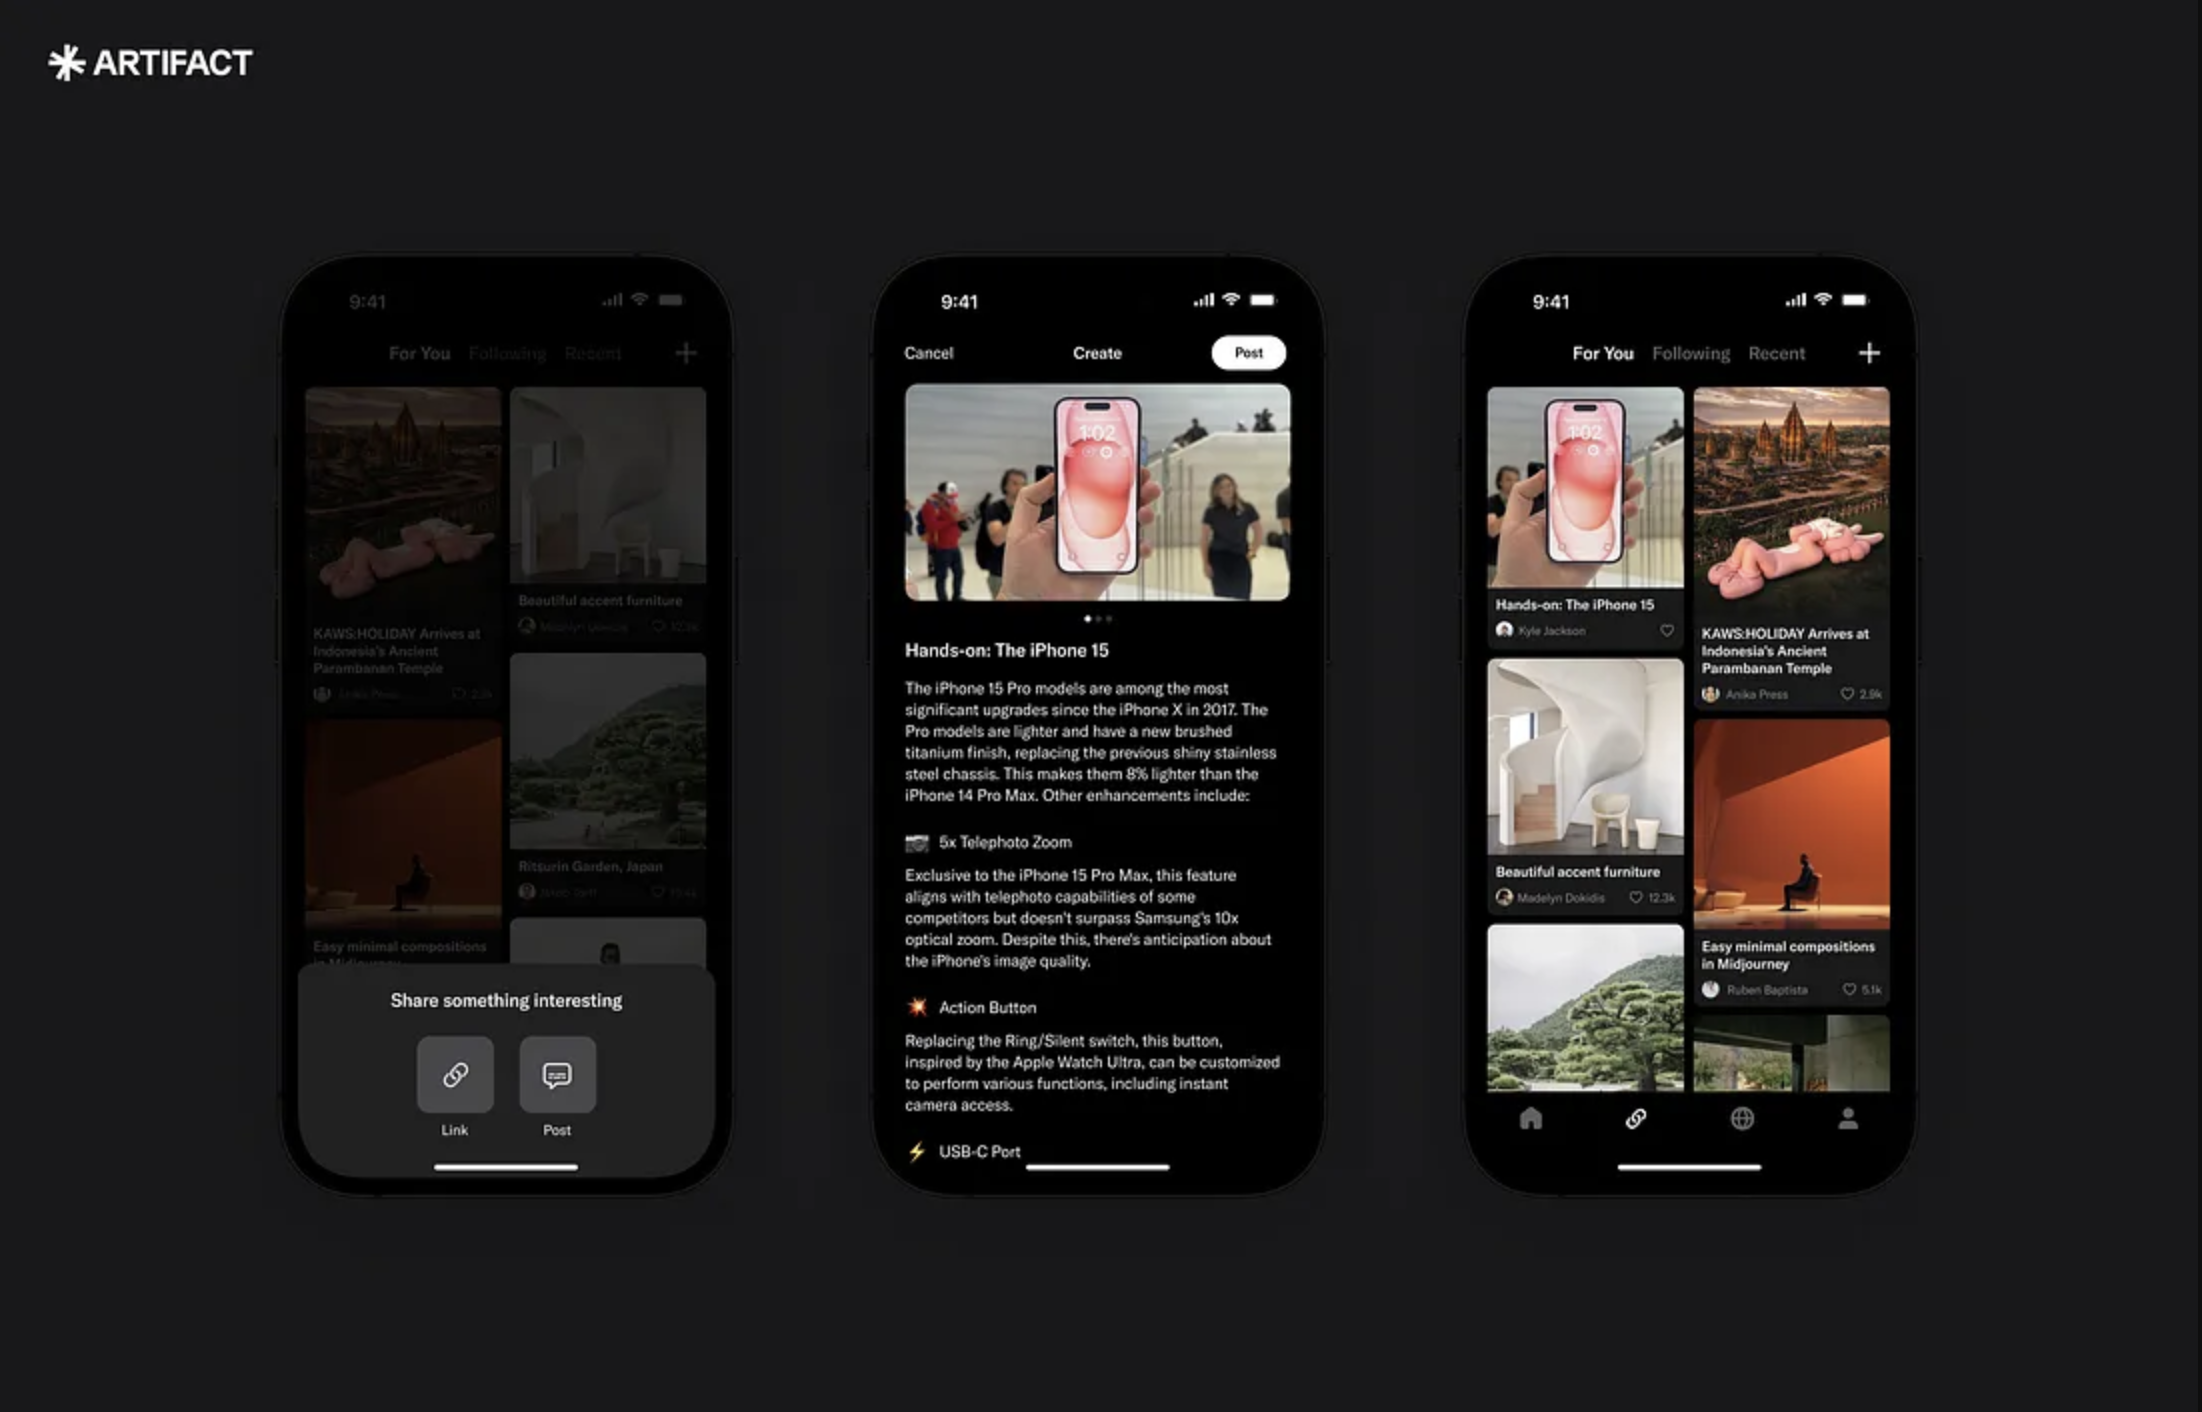 Instagram founders shut down AI news app Artifact a year after release